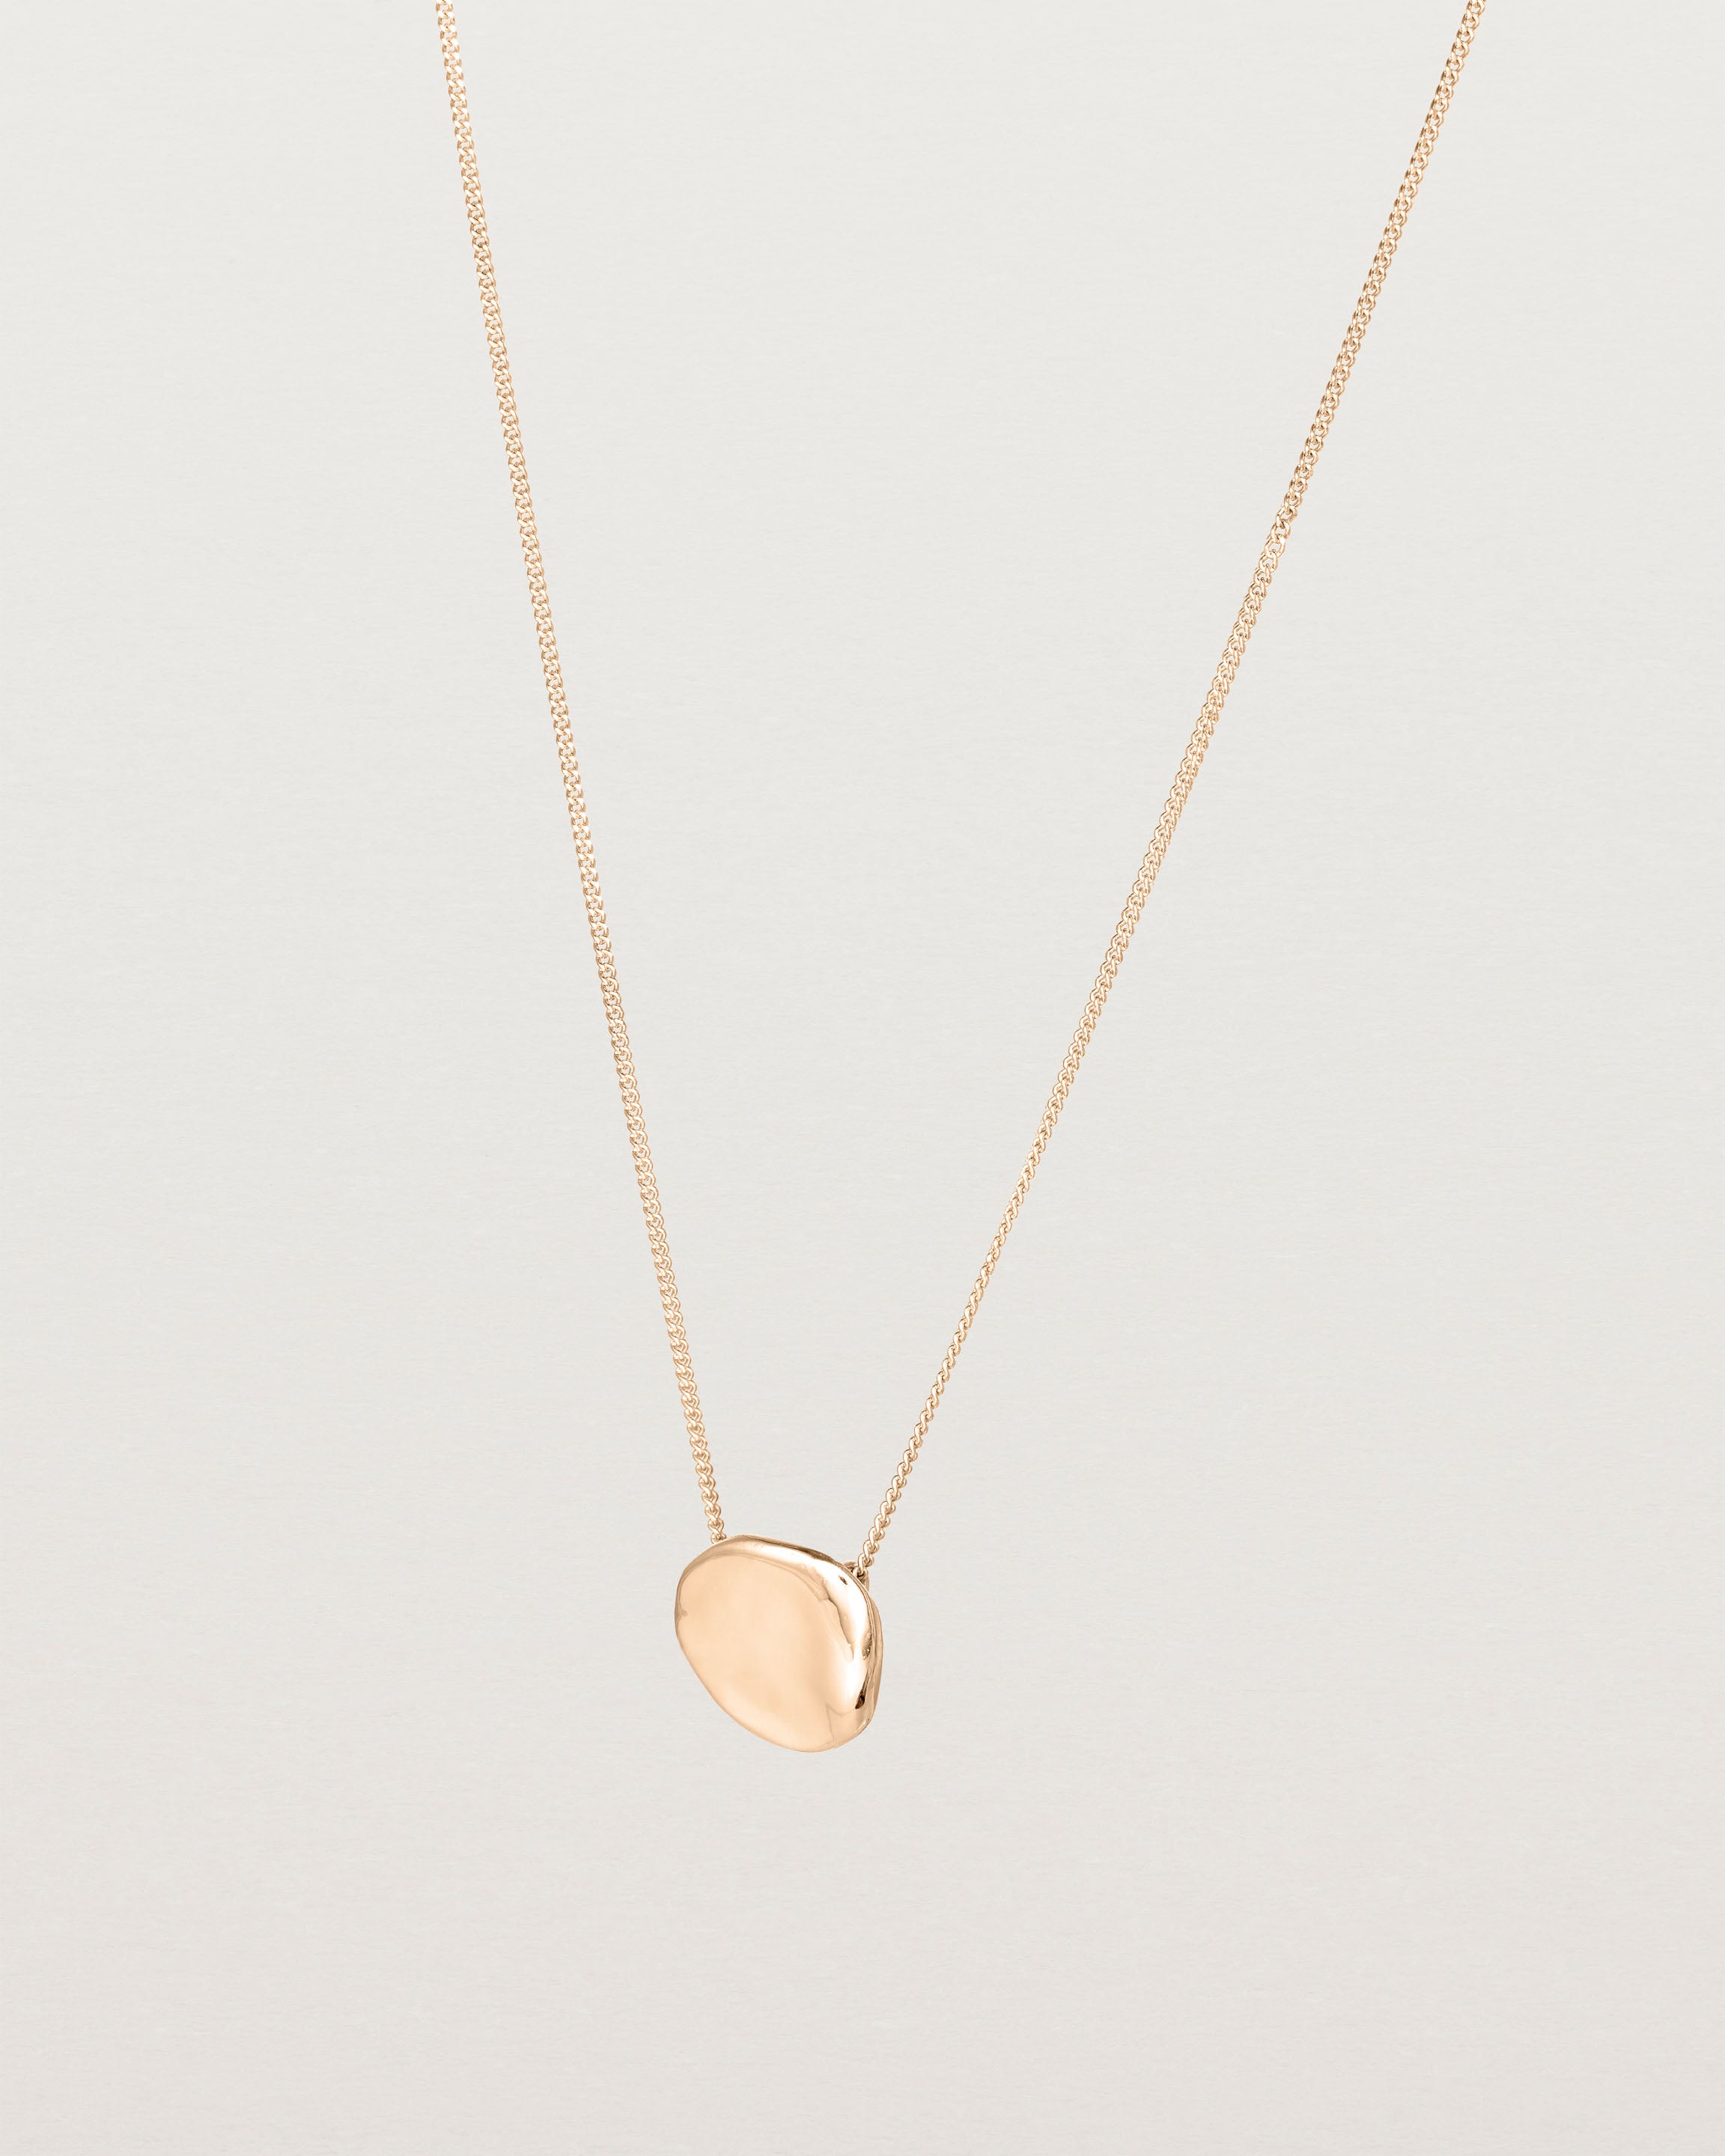 Angled view of the Petite Mana Necklace in rose gold.